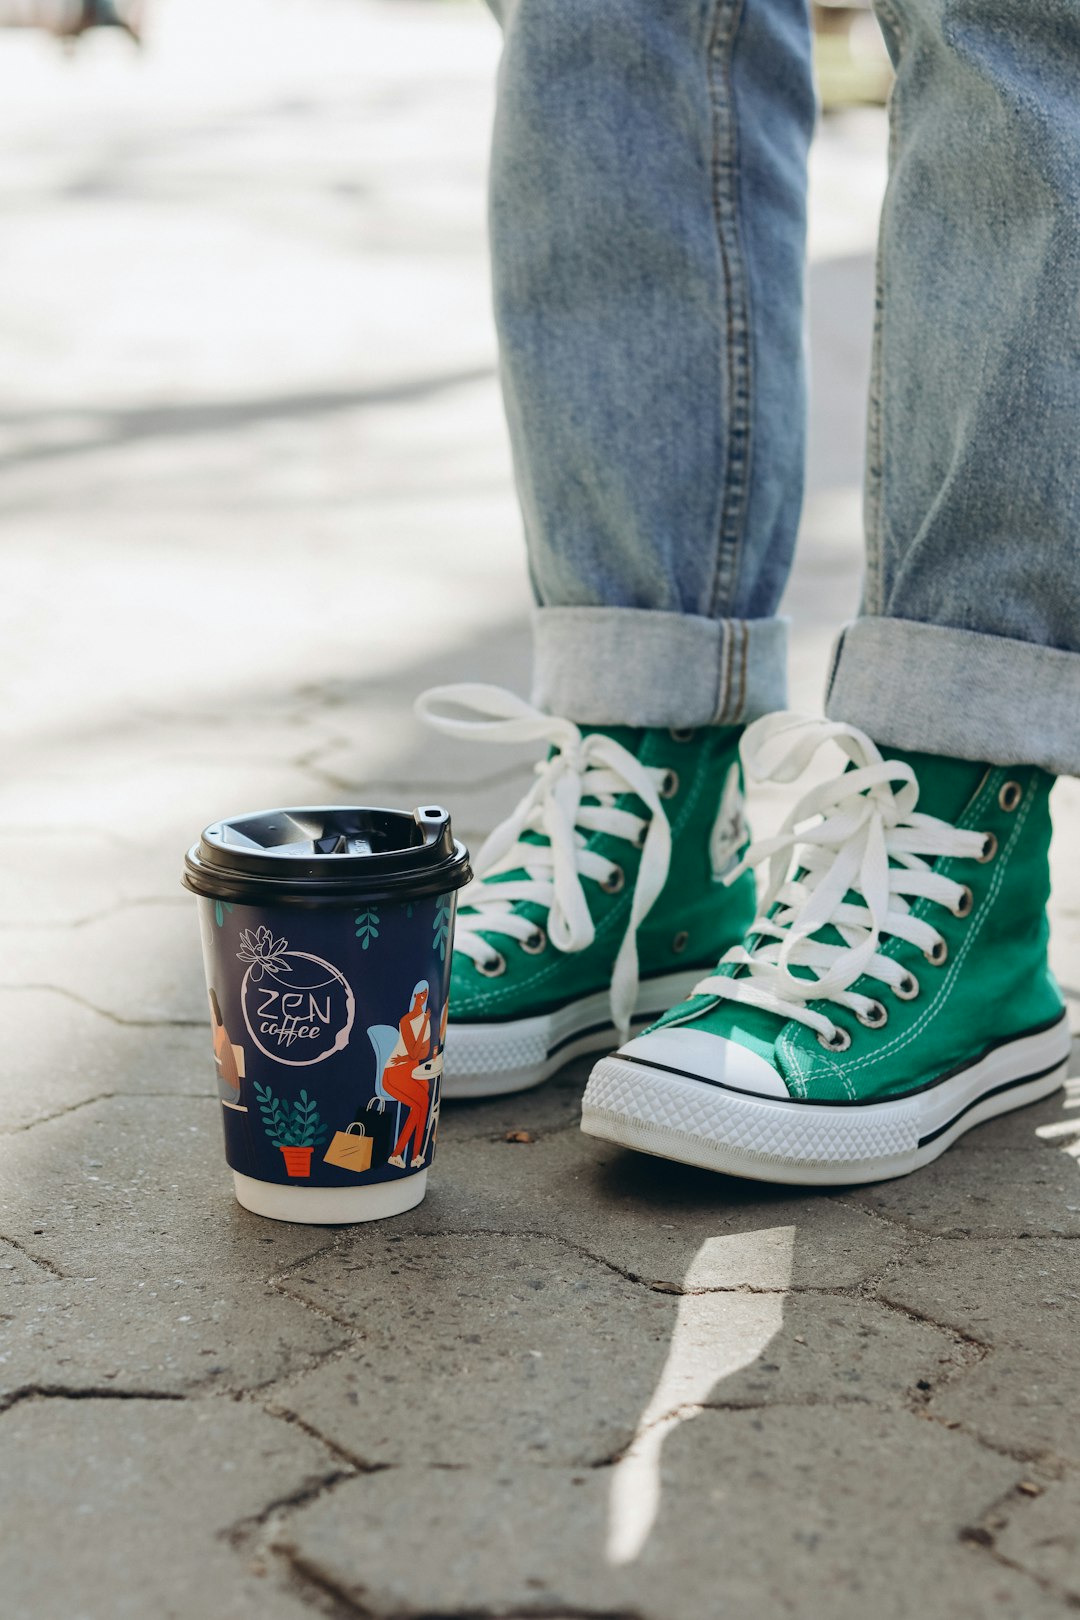 blue and white labeled cup beside person wearing green and white nike sneakers